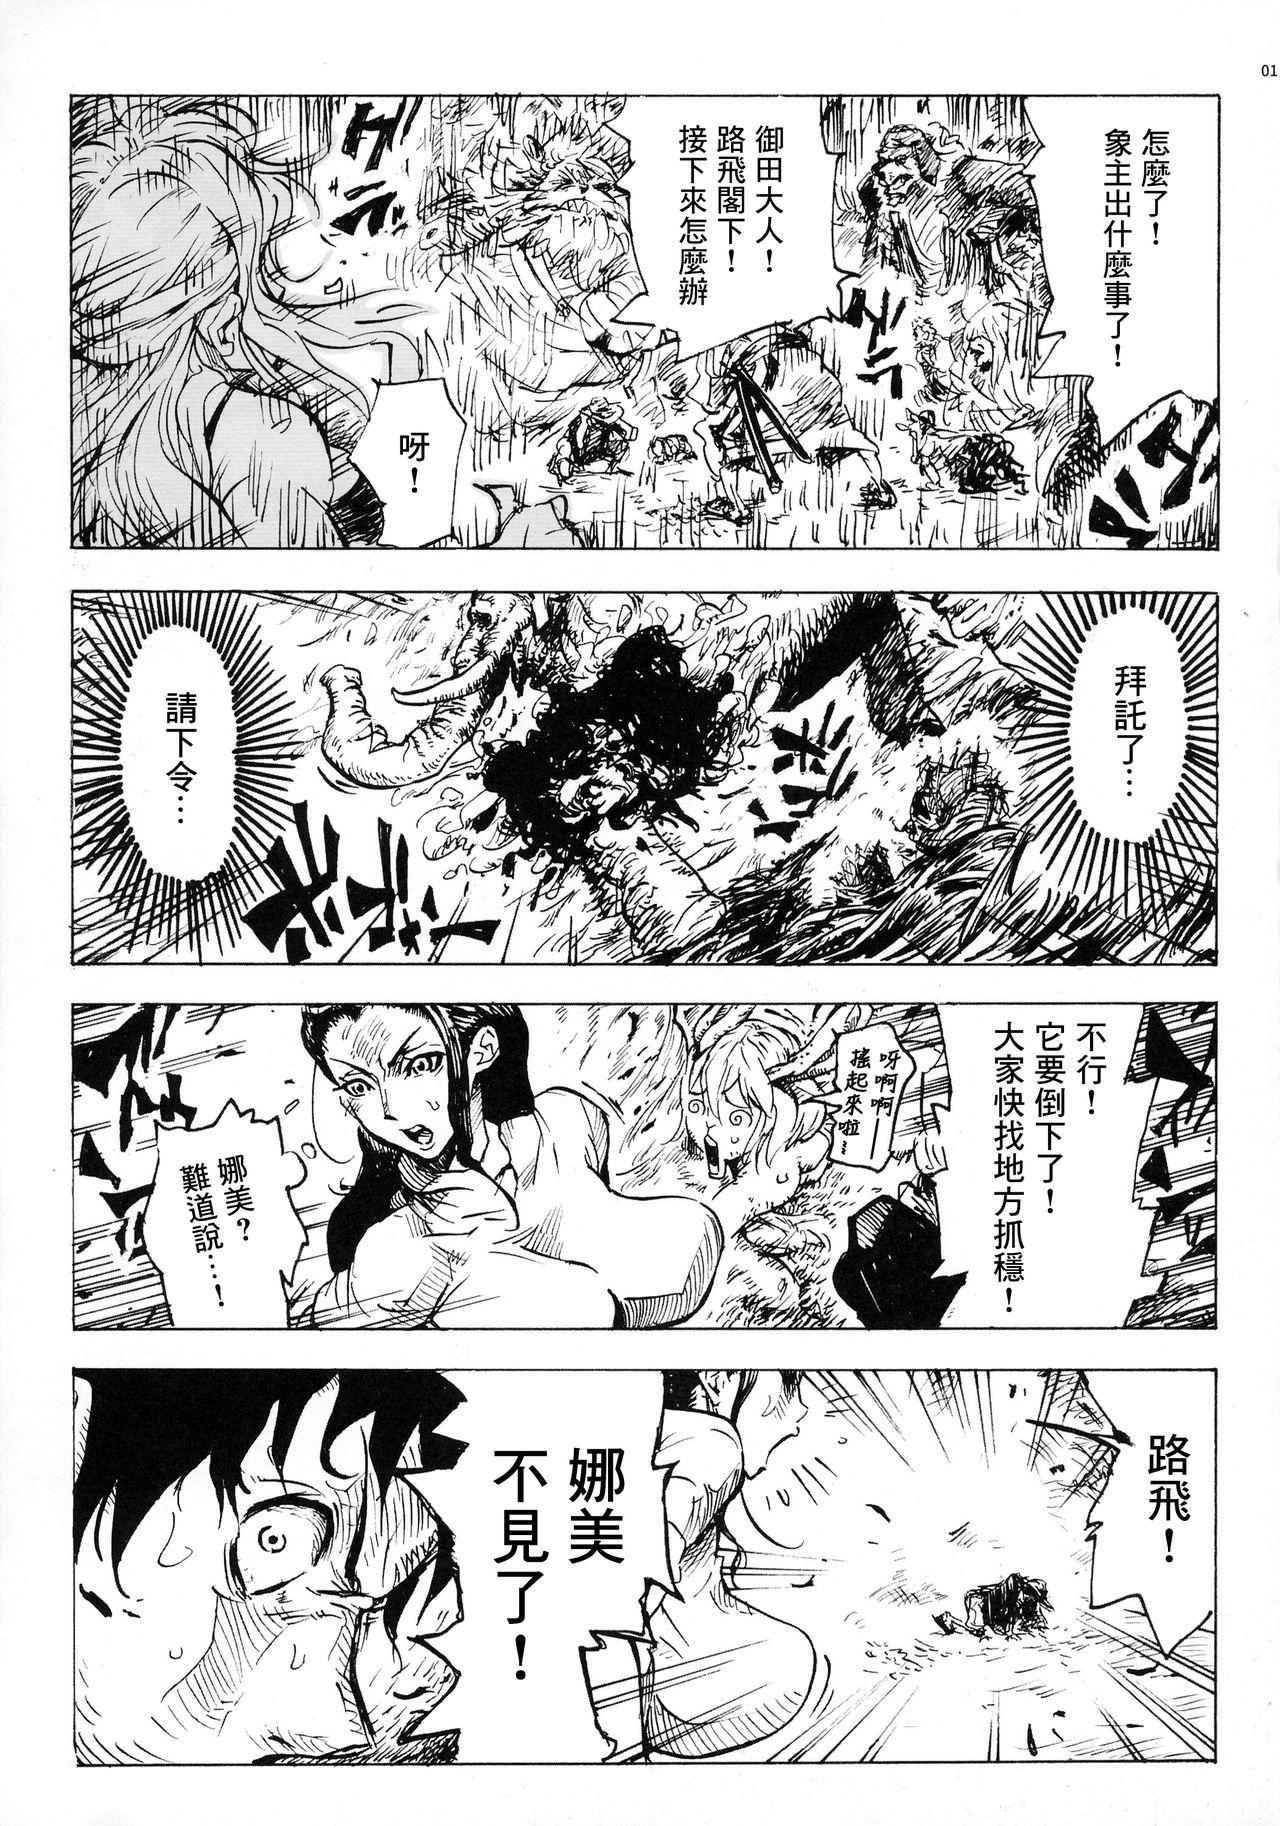 Anime P.O.M Another Episode "J.A.C.K" - One piece Creamy - Page 4